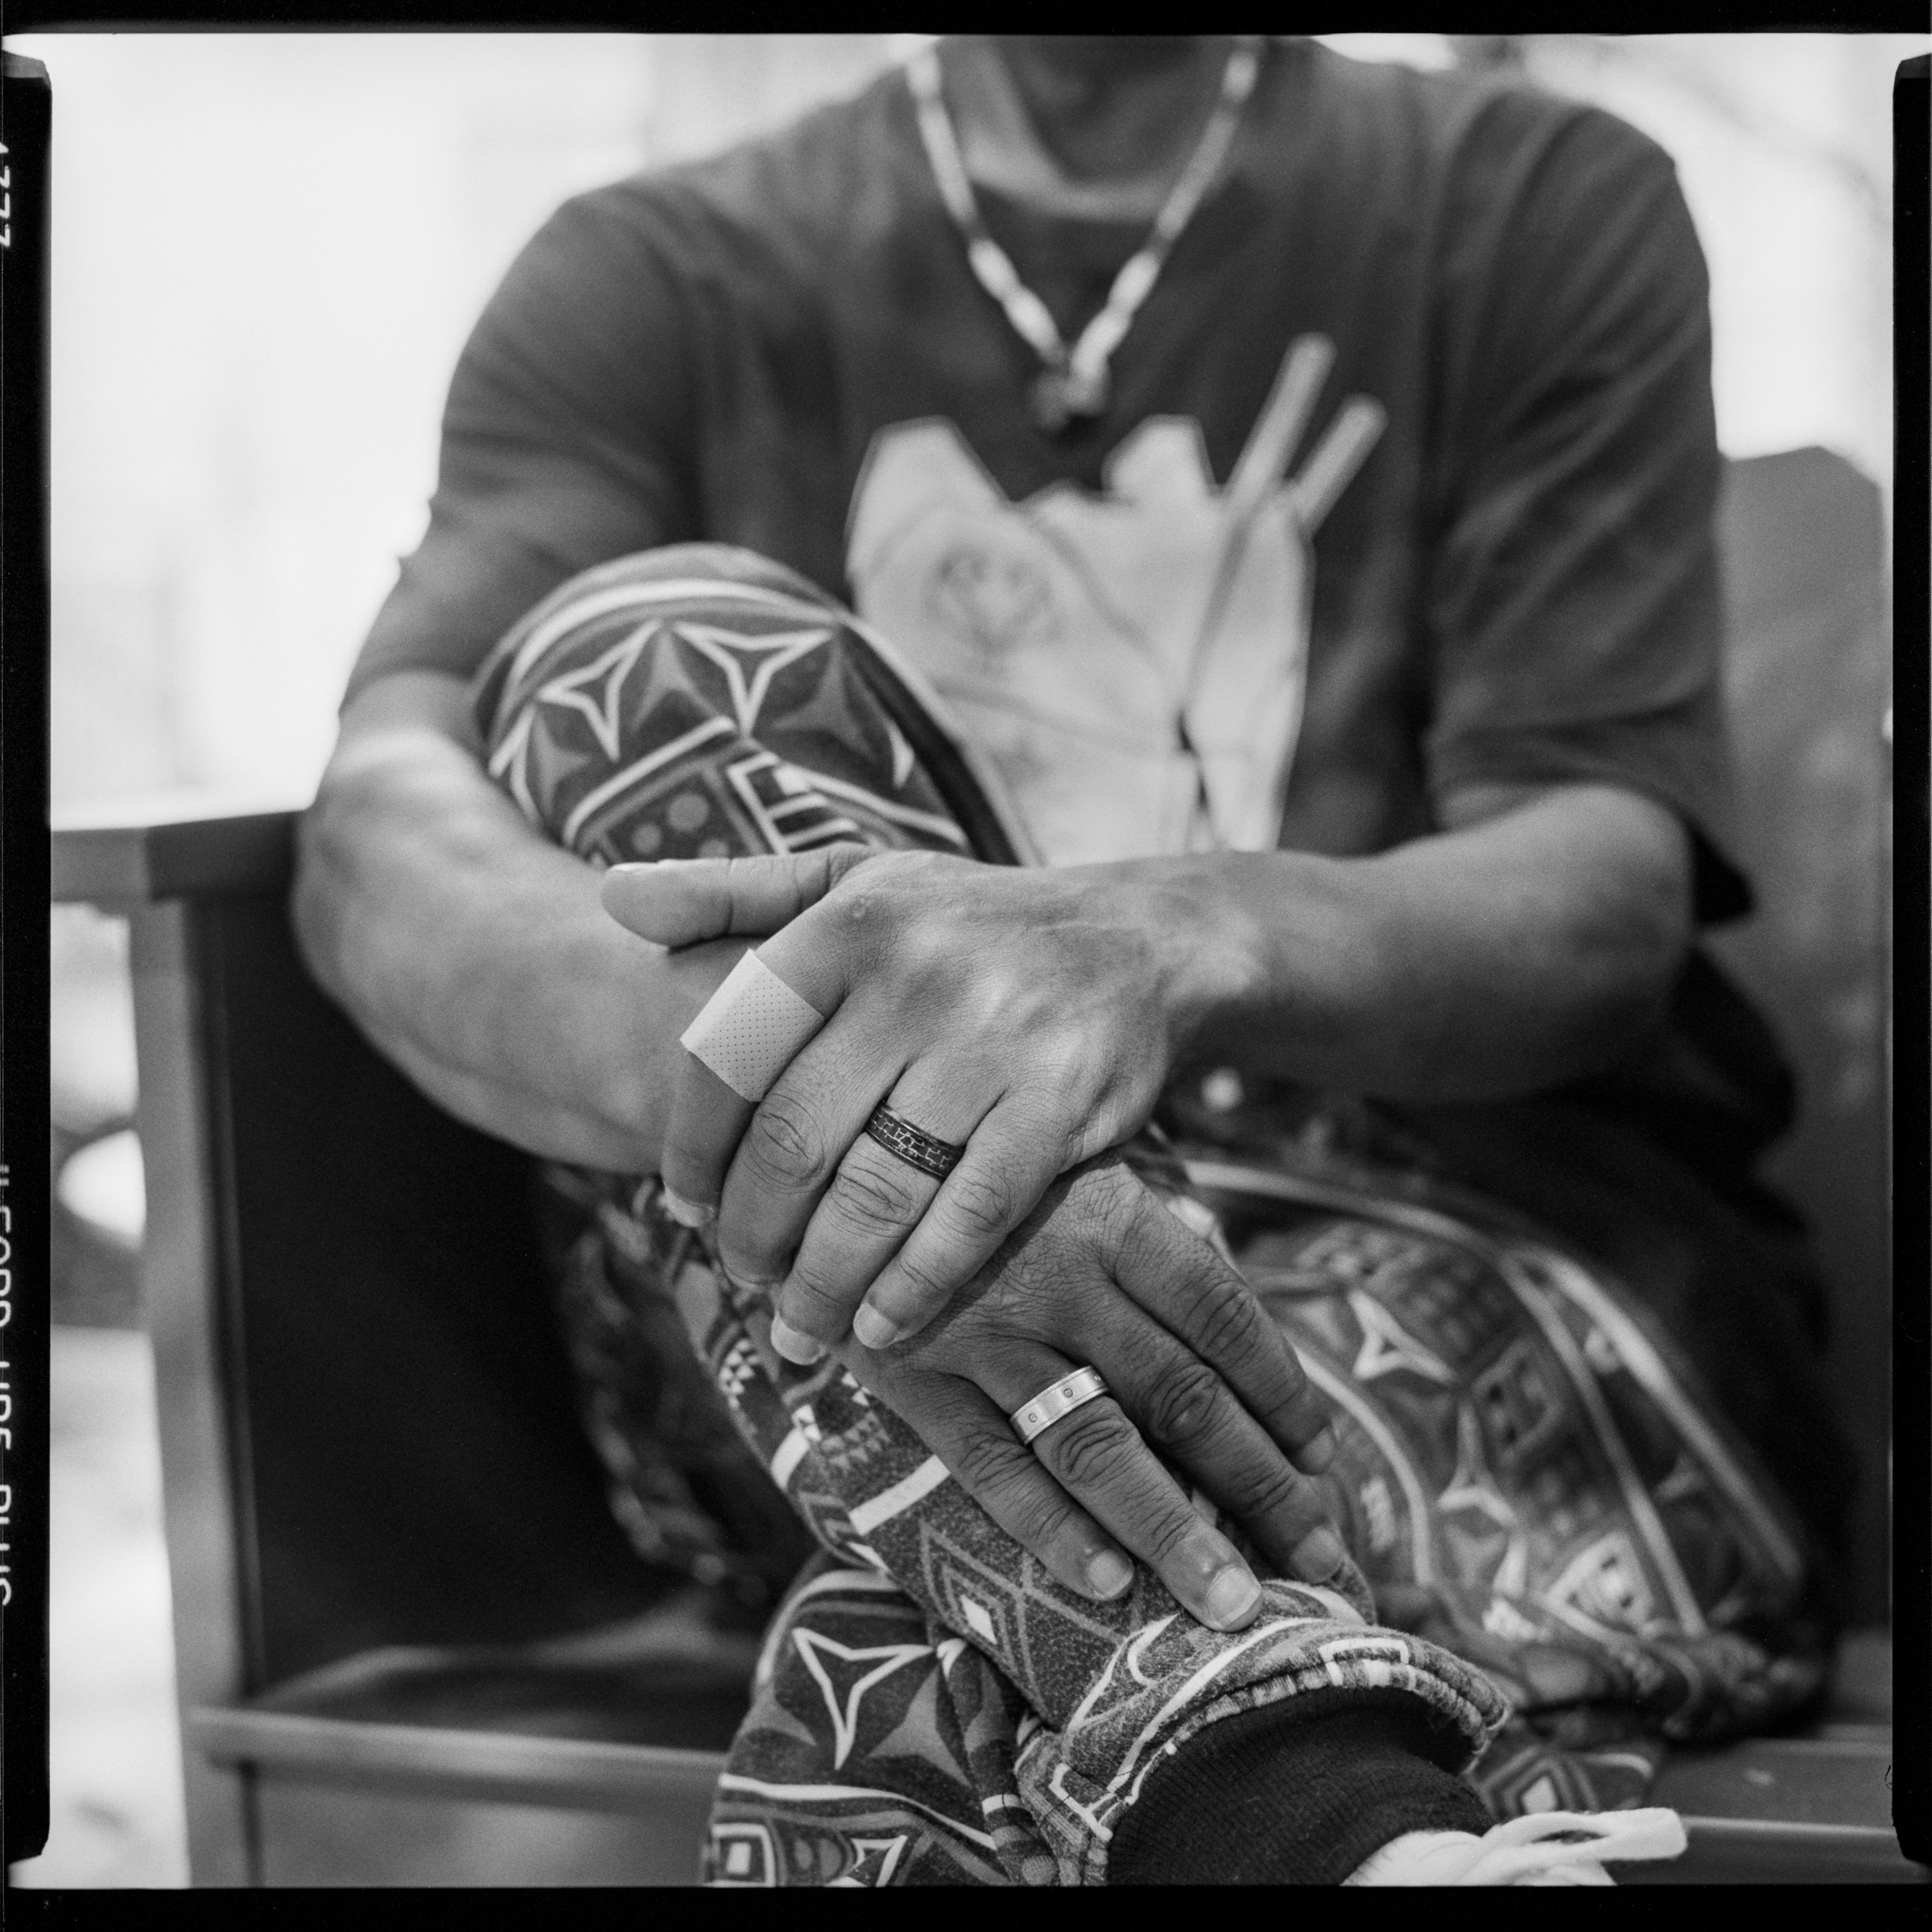 Image description: Black and white photograph of Michael’s hands. Michael is sitting with his legs crossed, his hands folded on his knee. His face is not visible. He has a bandage on one finger, and a ring on another finger. His pants are patterned in an African style.